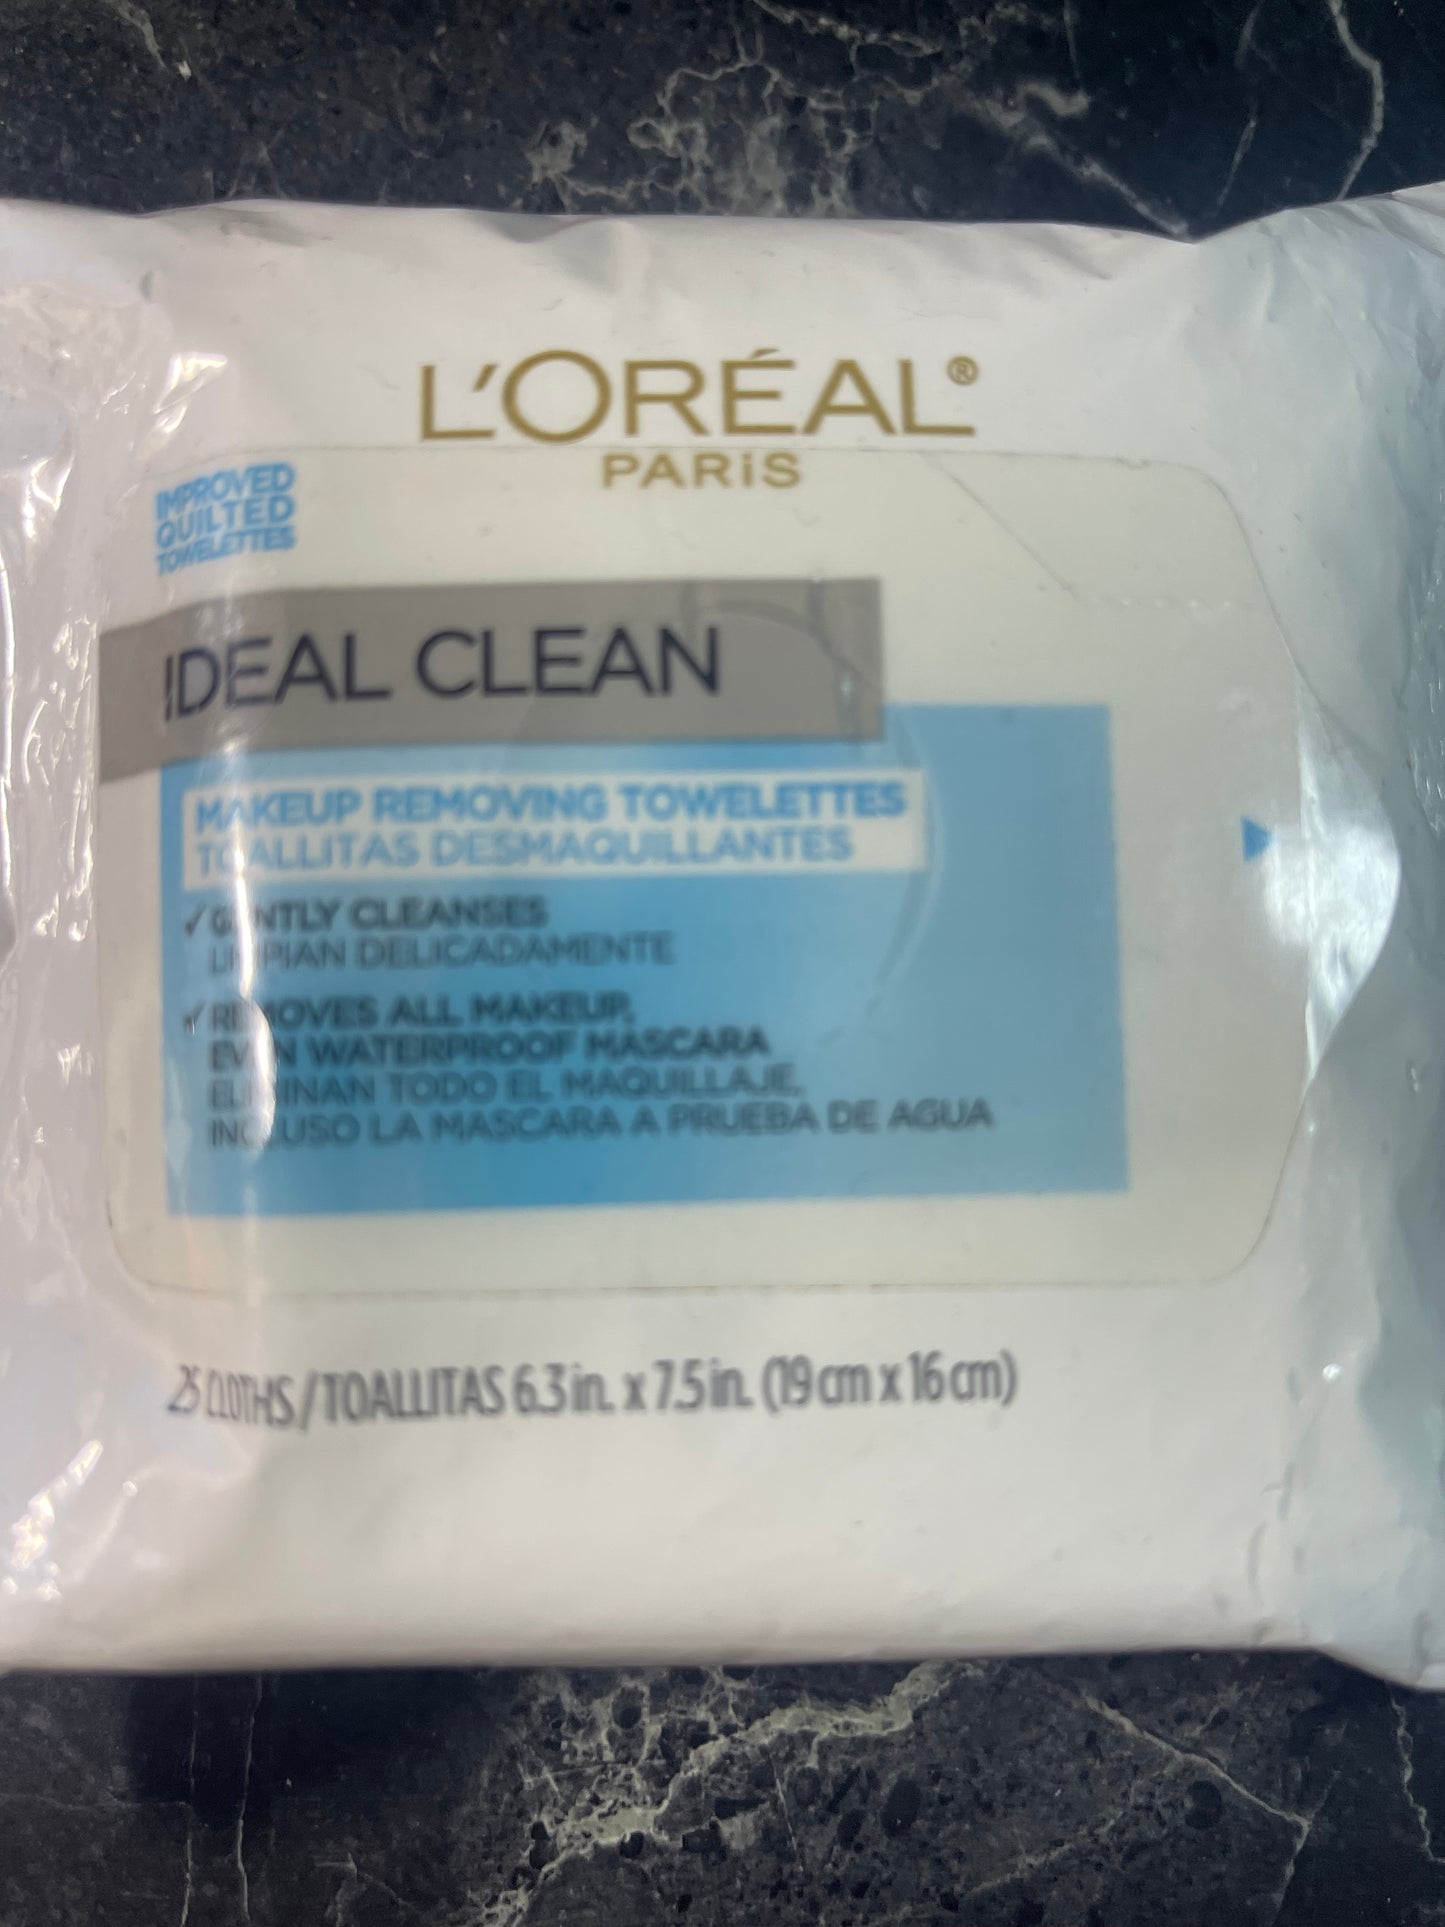 L'Oreal Paris Ideal Clean Makeup Removing Towelettes Facial Wipes, NEW